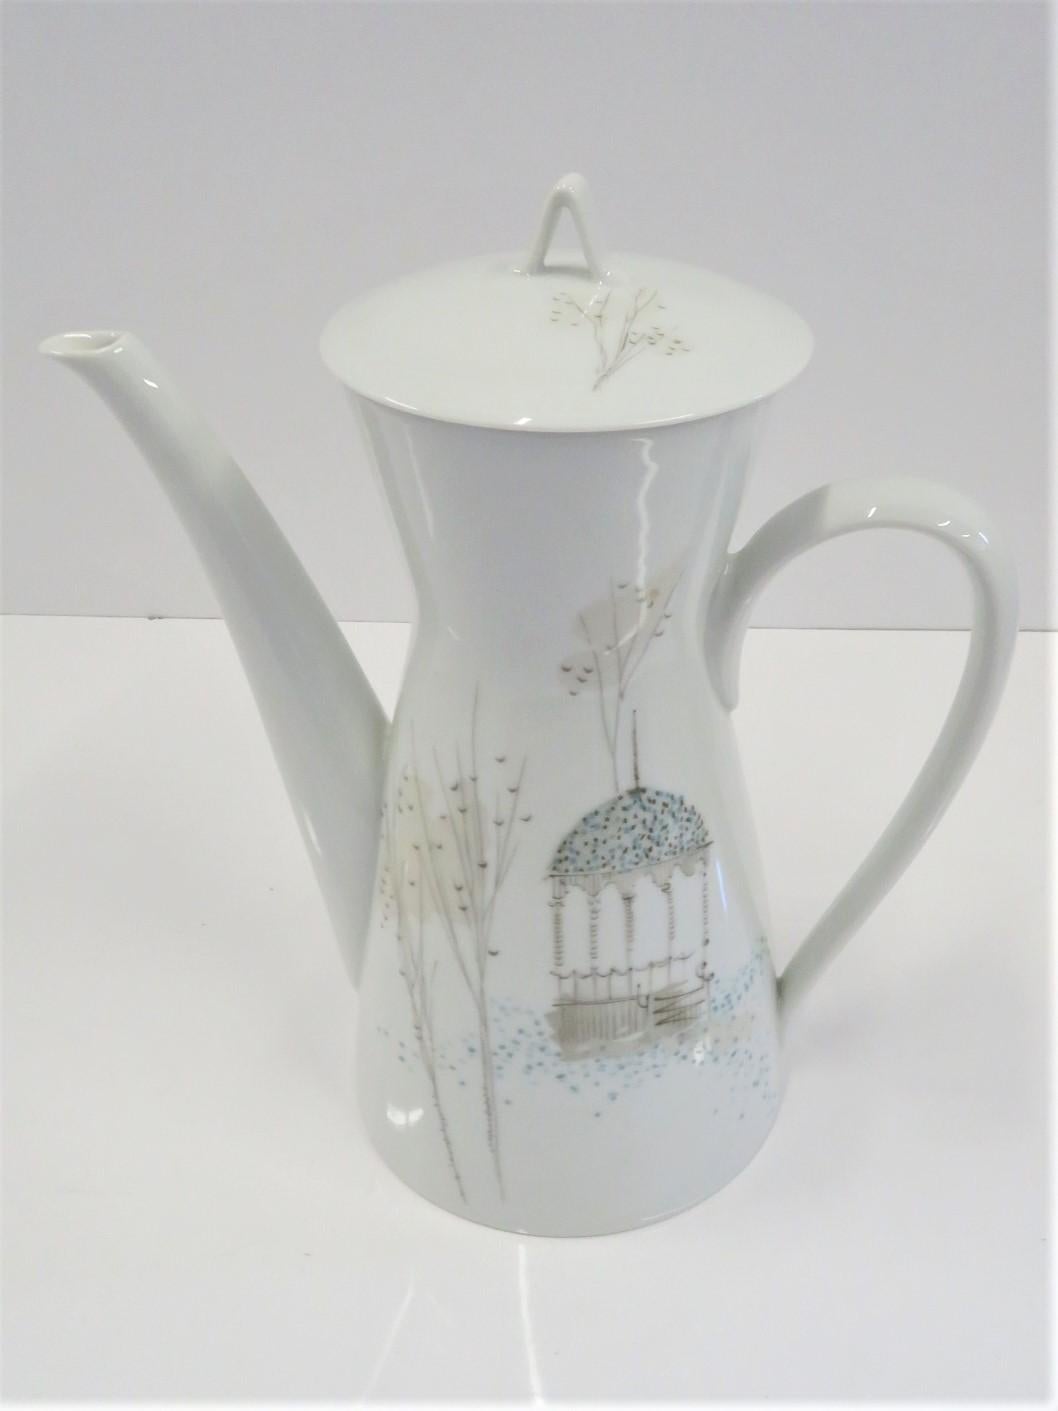 Lovely Rosenthal porcelain coffee pot designed by Raymond Loewy in the Classic Modern Form 2000 shape and with the Rendezvous decoration. The decoration depicts a gazebo in garden with stylized bare trees in an Autumn day. A soft color palette of